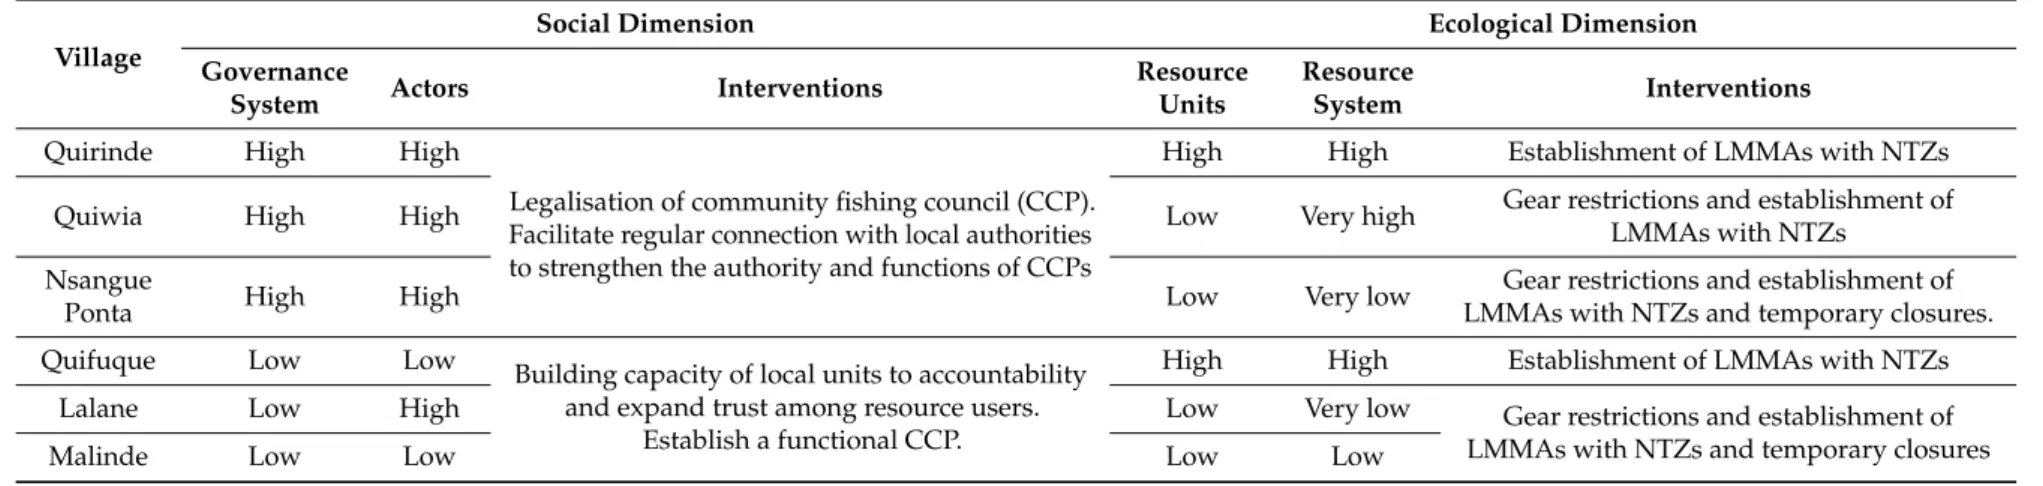 Table 5. Overall status of social–ecological dimensions in the six villages in Cabo Delgado Province and possible social and ecological interventions to achieve sustainability